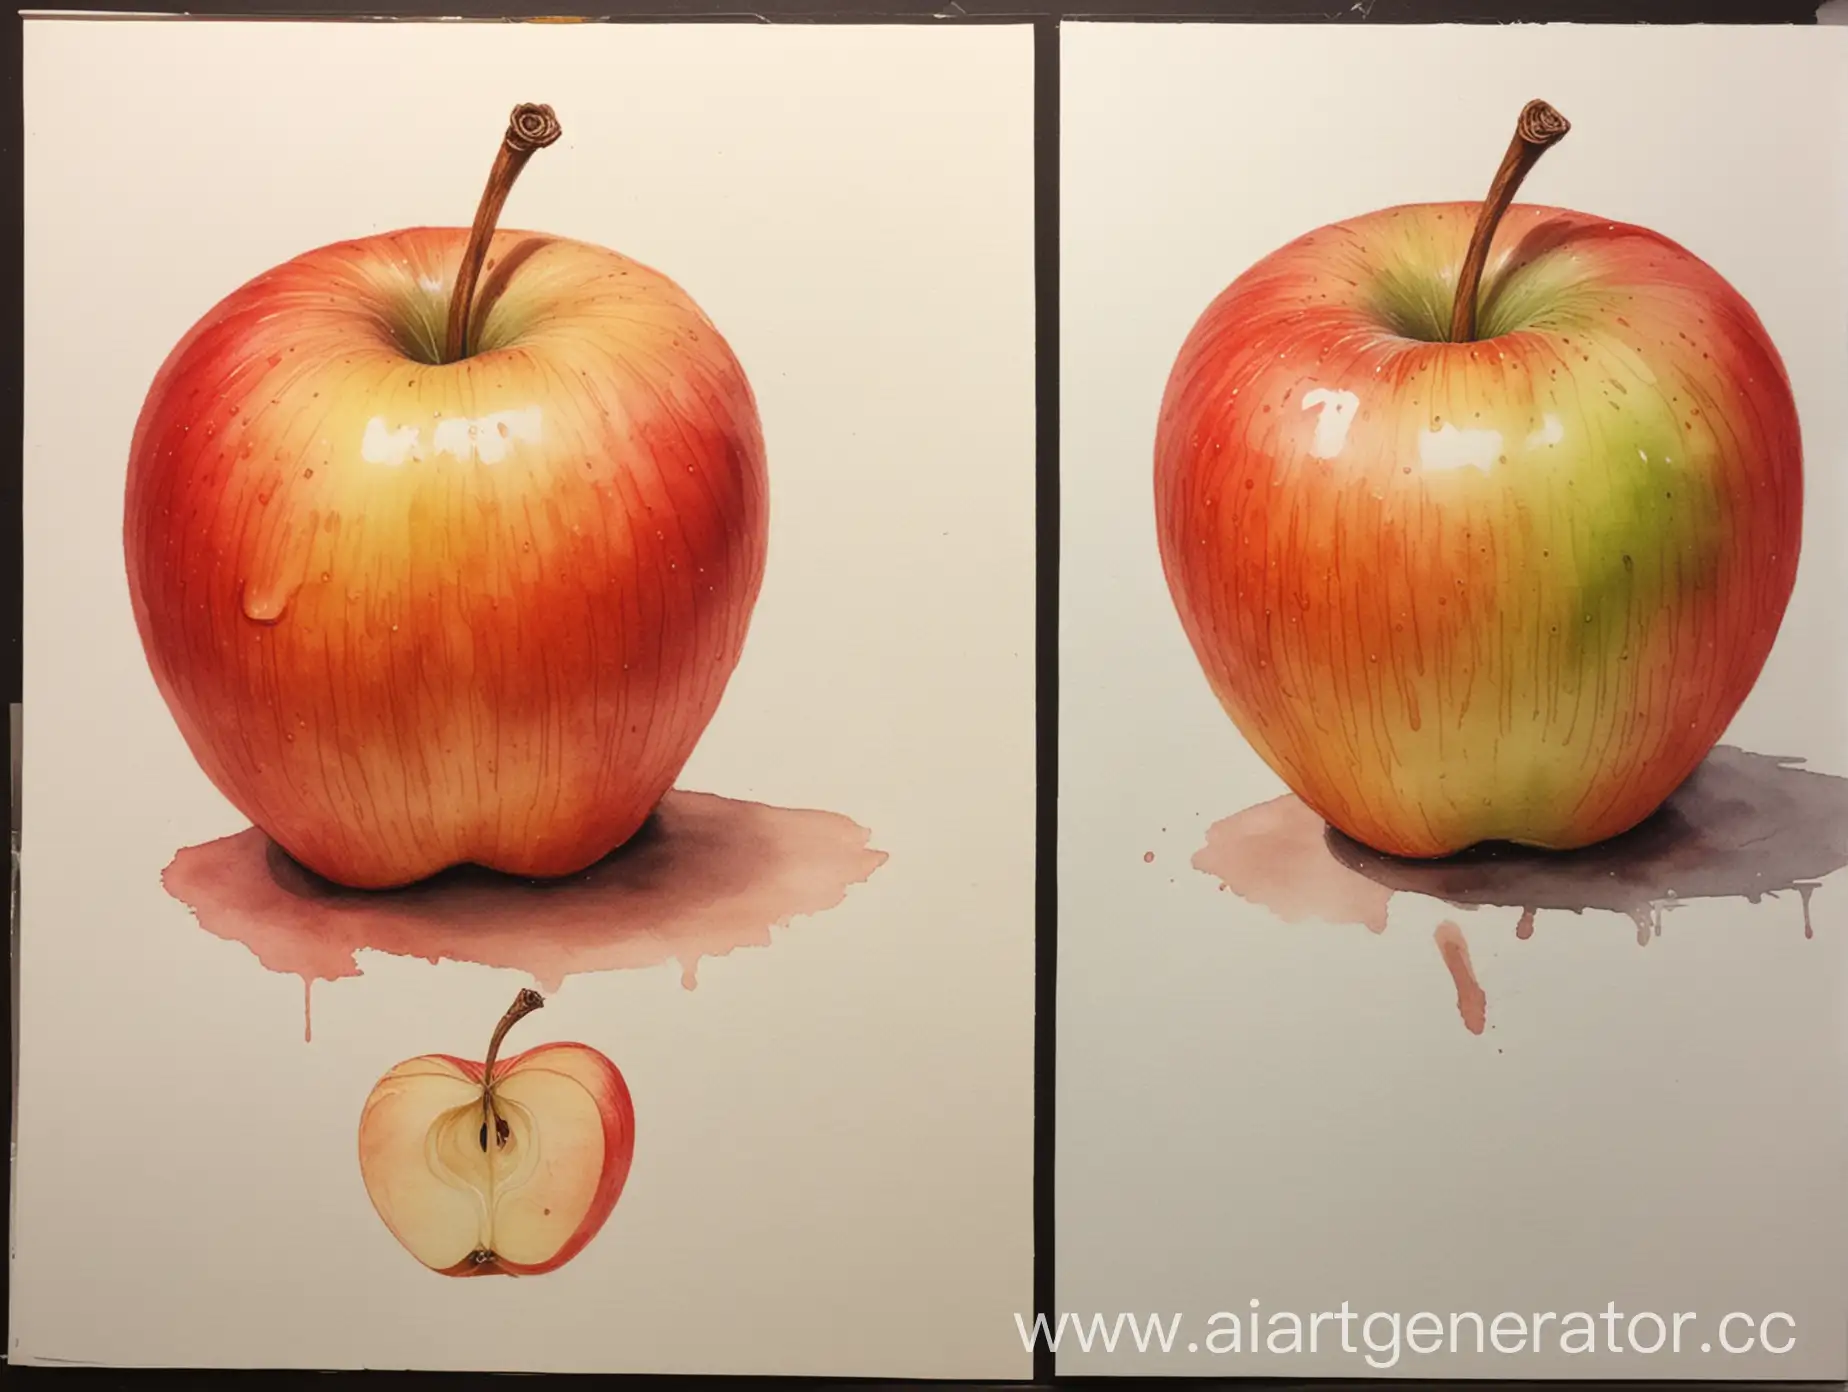 Realistic-Watercolor-Painting-of-Two-Apples-in-Warm-and-Cold-Tones